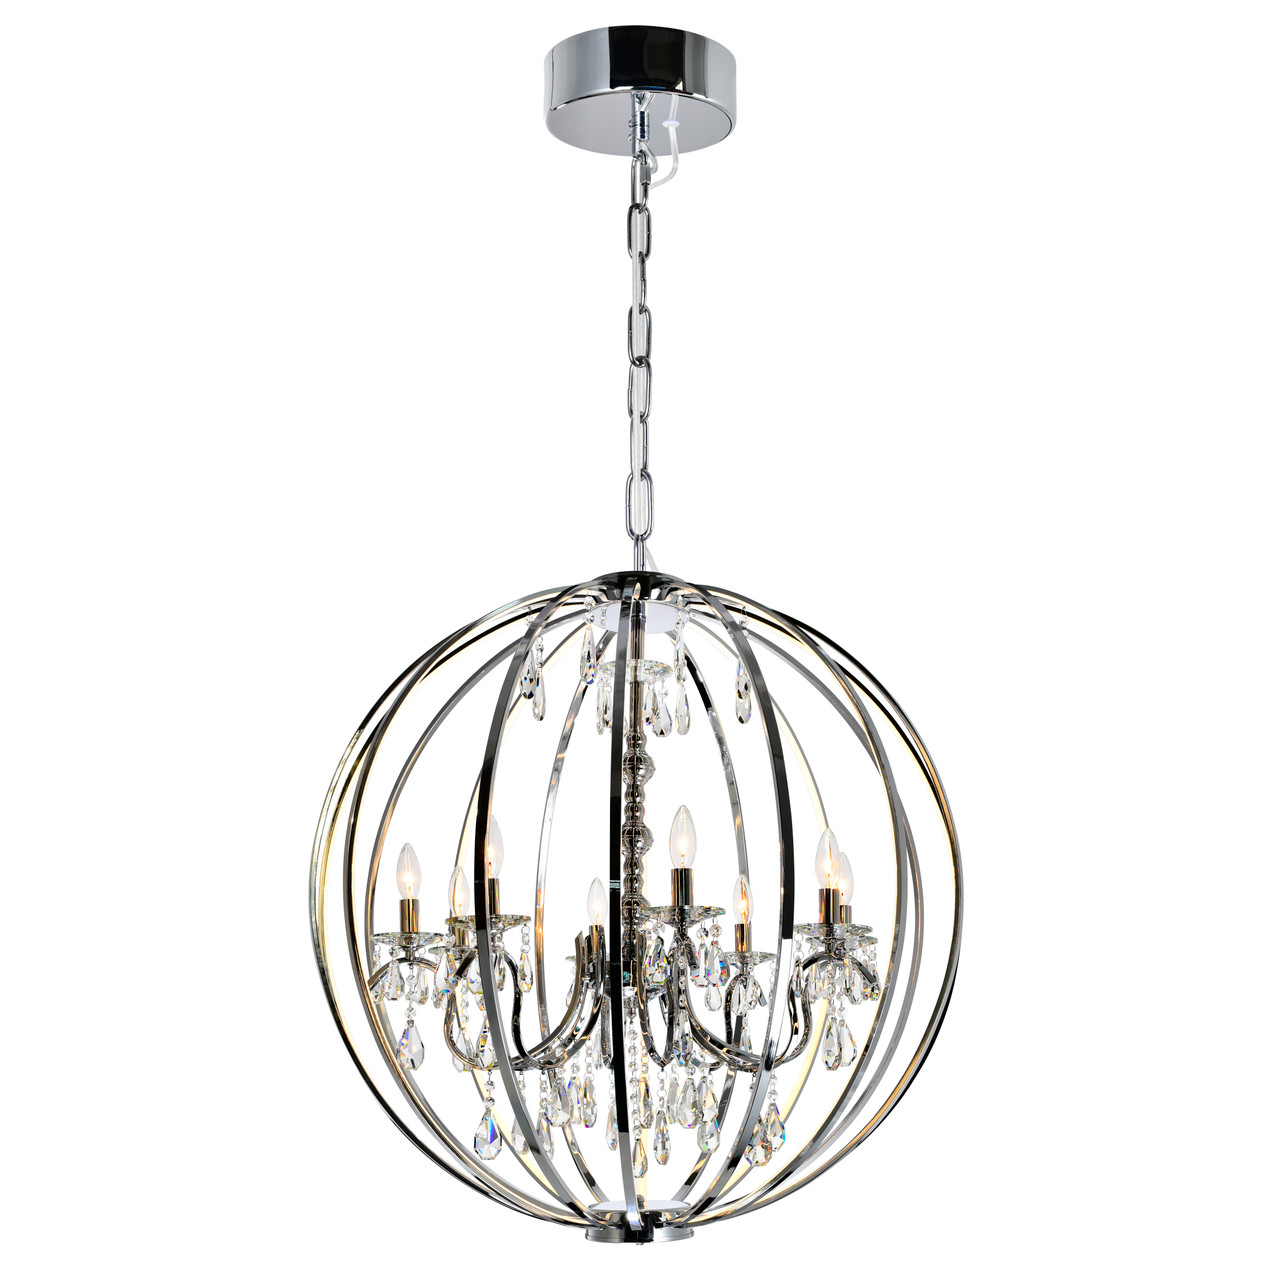 CWI LIGHTING 5025P34C-8 8 Light Up Chandelier with Chrome finish